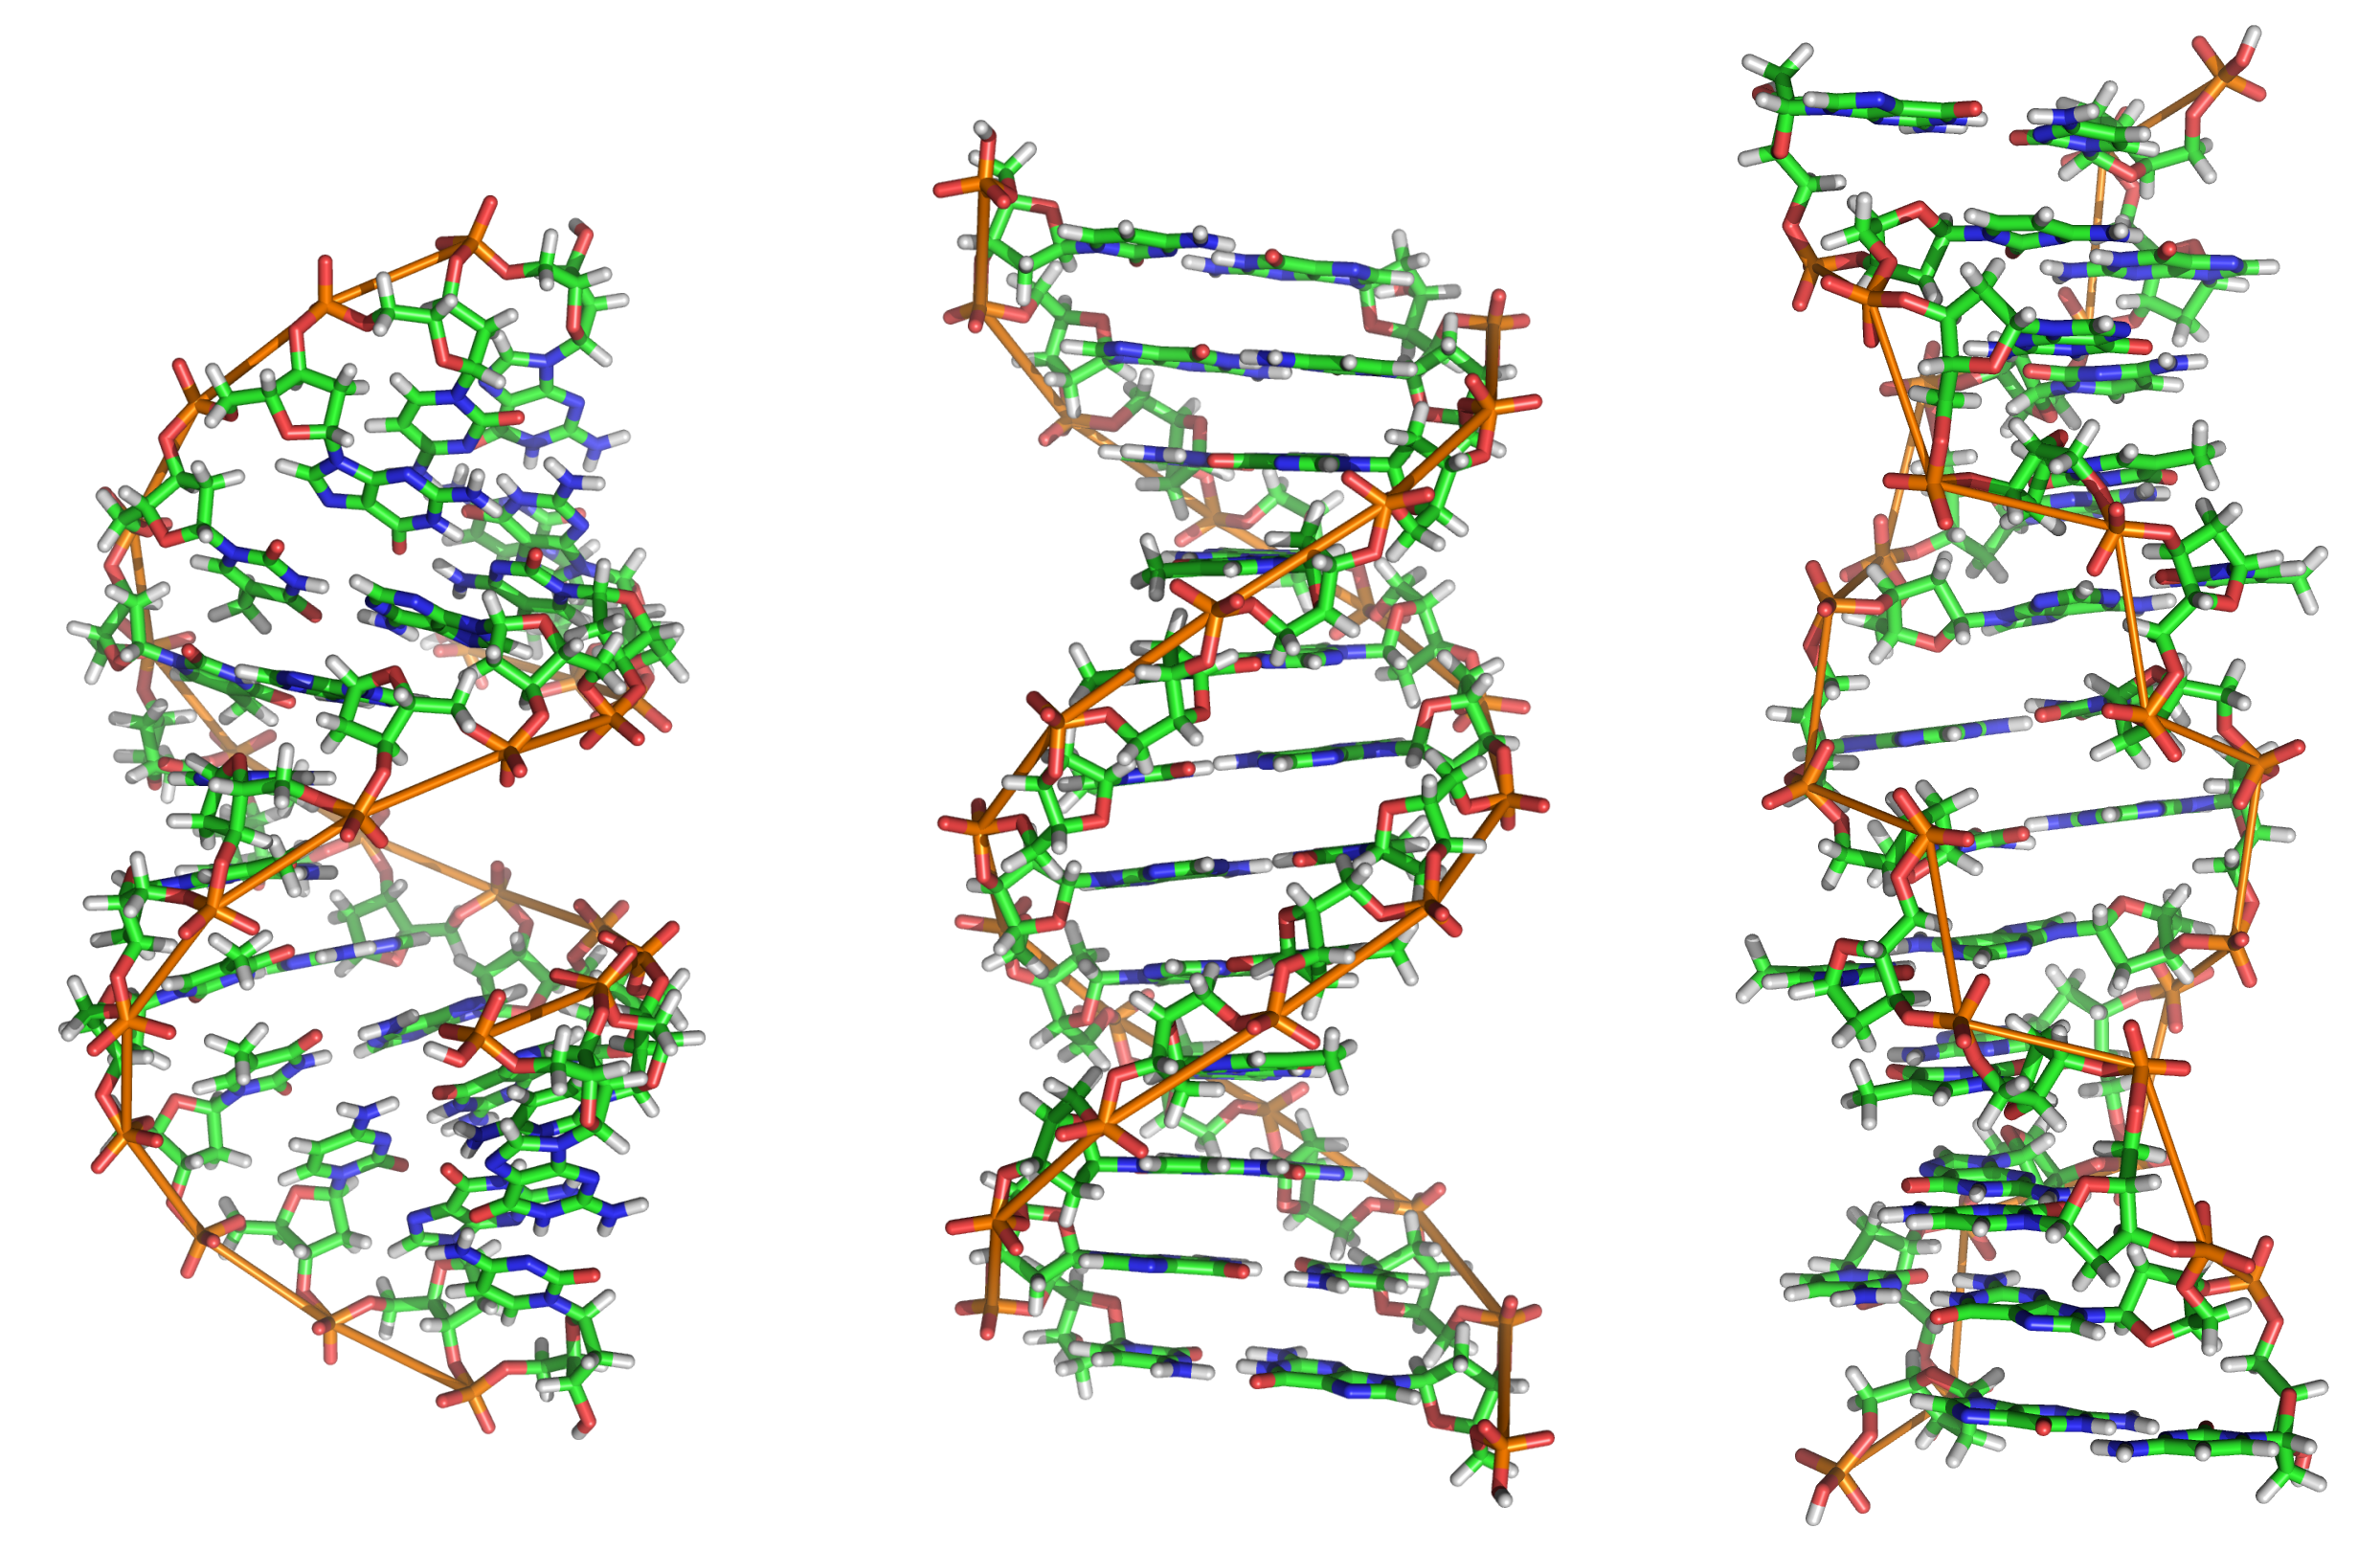  Wonderful Colorful Dna picture